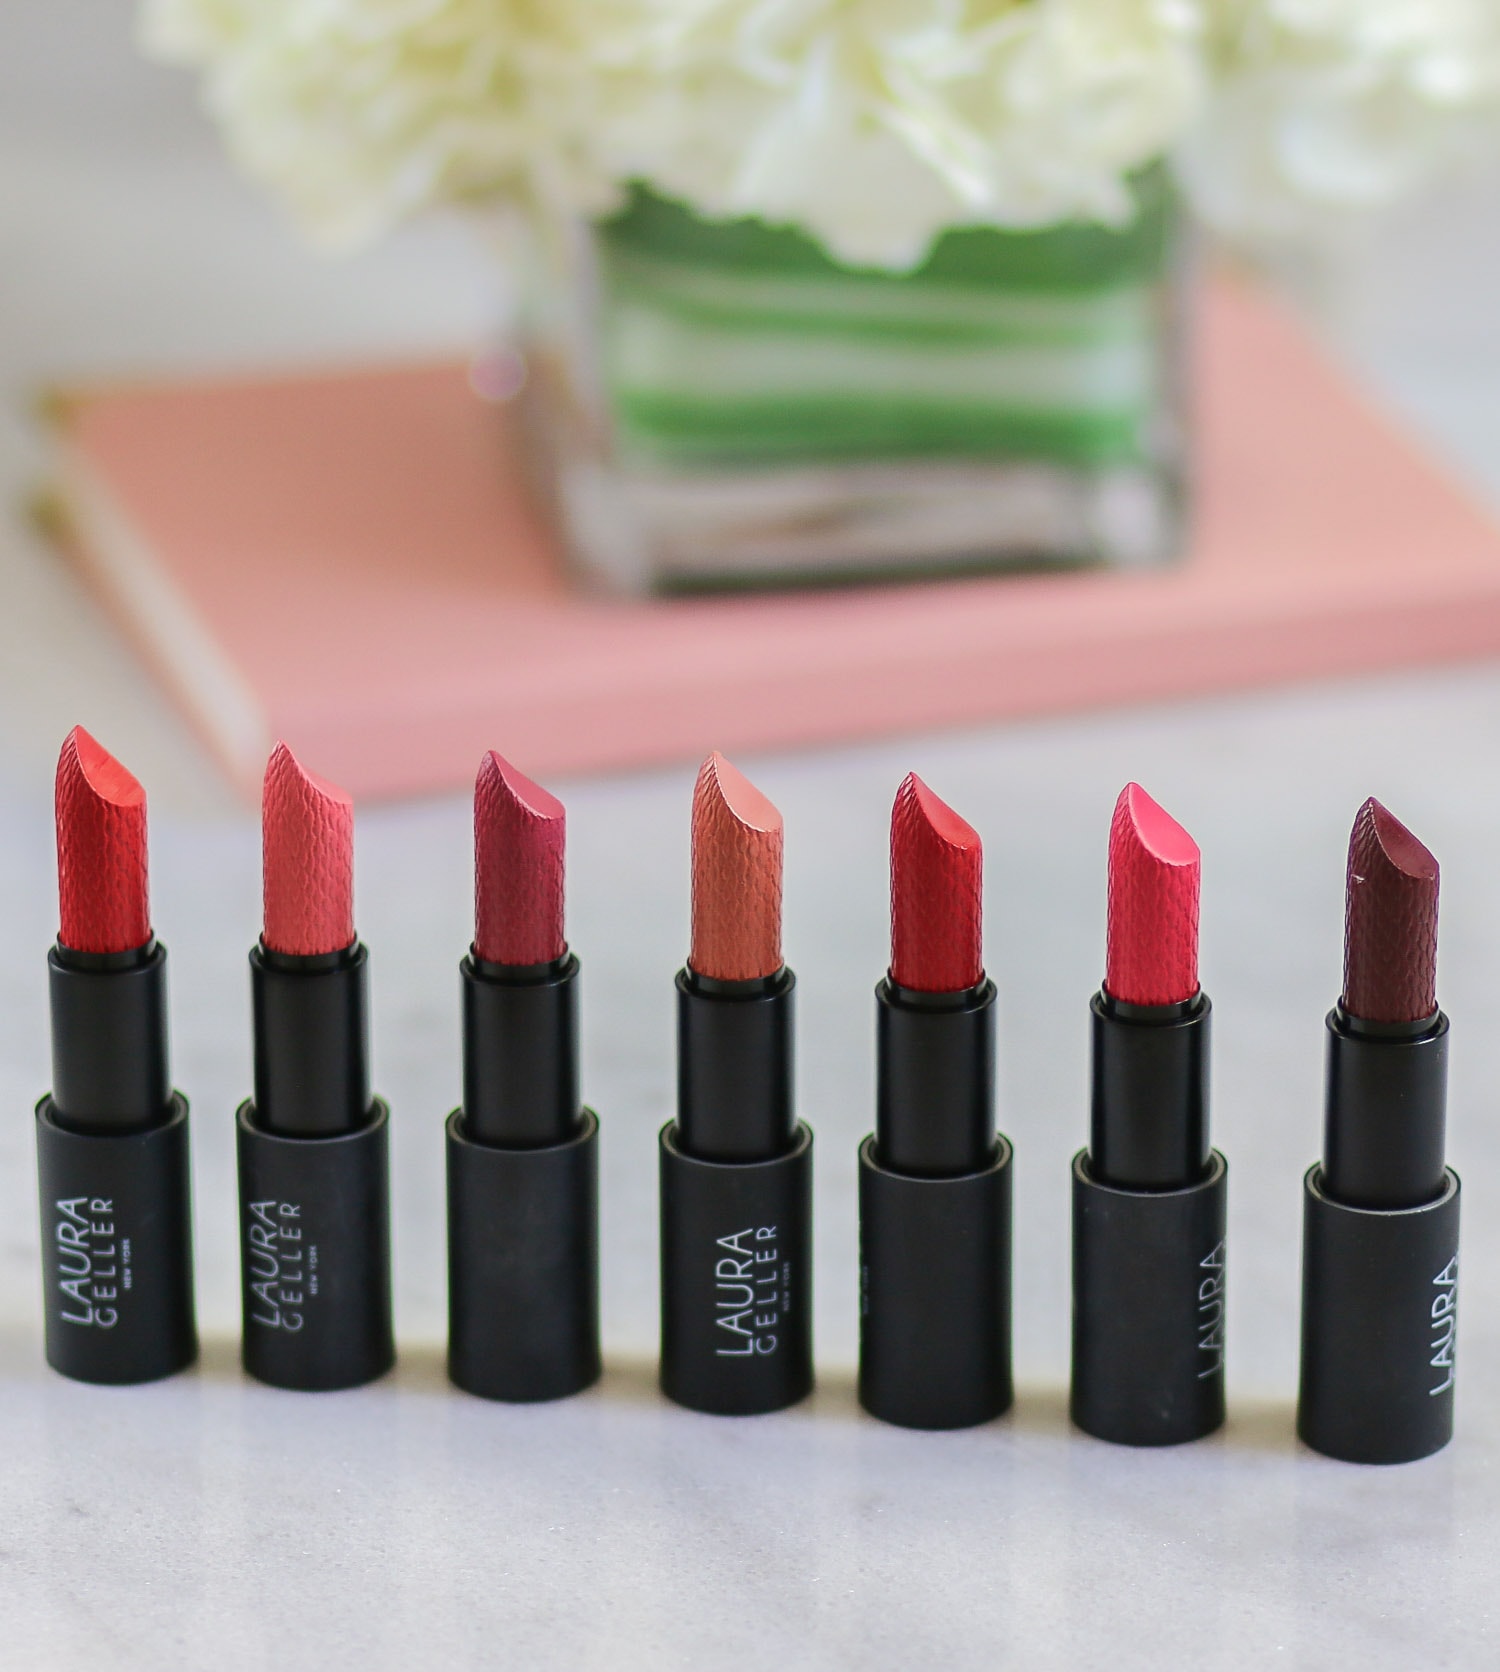 The Laura Geller Iconic Baked Sculpting Lipsticks are absolutely wonderful. They're highly pigmented and smooth lipsticks with a satin finish. The formula is long-lasting, but your lips feel comfortable all day long. This line is available in 12 shades. Click through to see lip swatches of this line from beauty blogger Ashley Brooke Nicholas! @laurageller